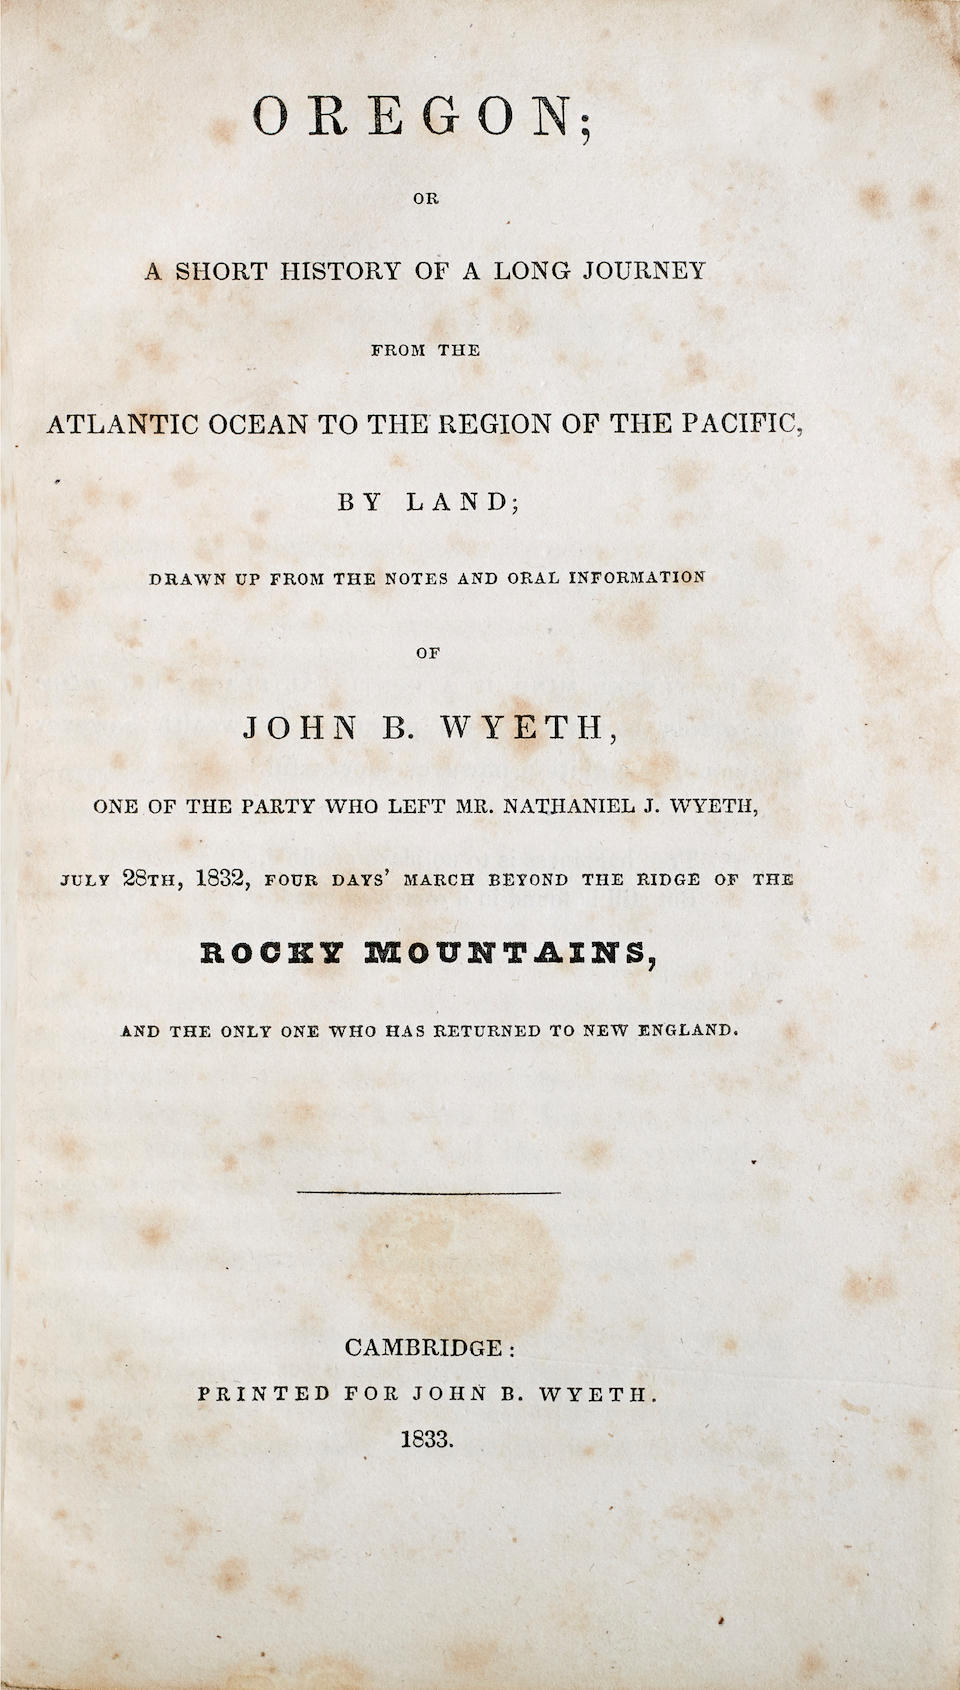 Bonhams Wyeth John B Et Al Oregon Or A Short History Of A Long Journey Form The Atlantic Ocean To The Region Of The Pacific By Land Cambridge Ma Printed For